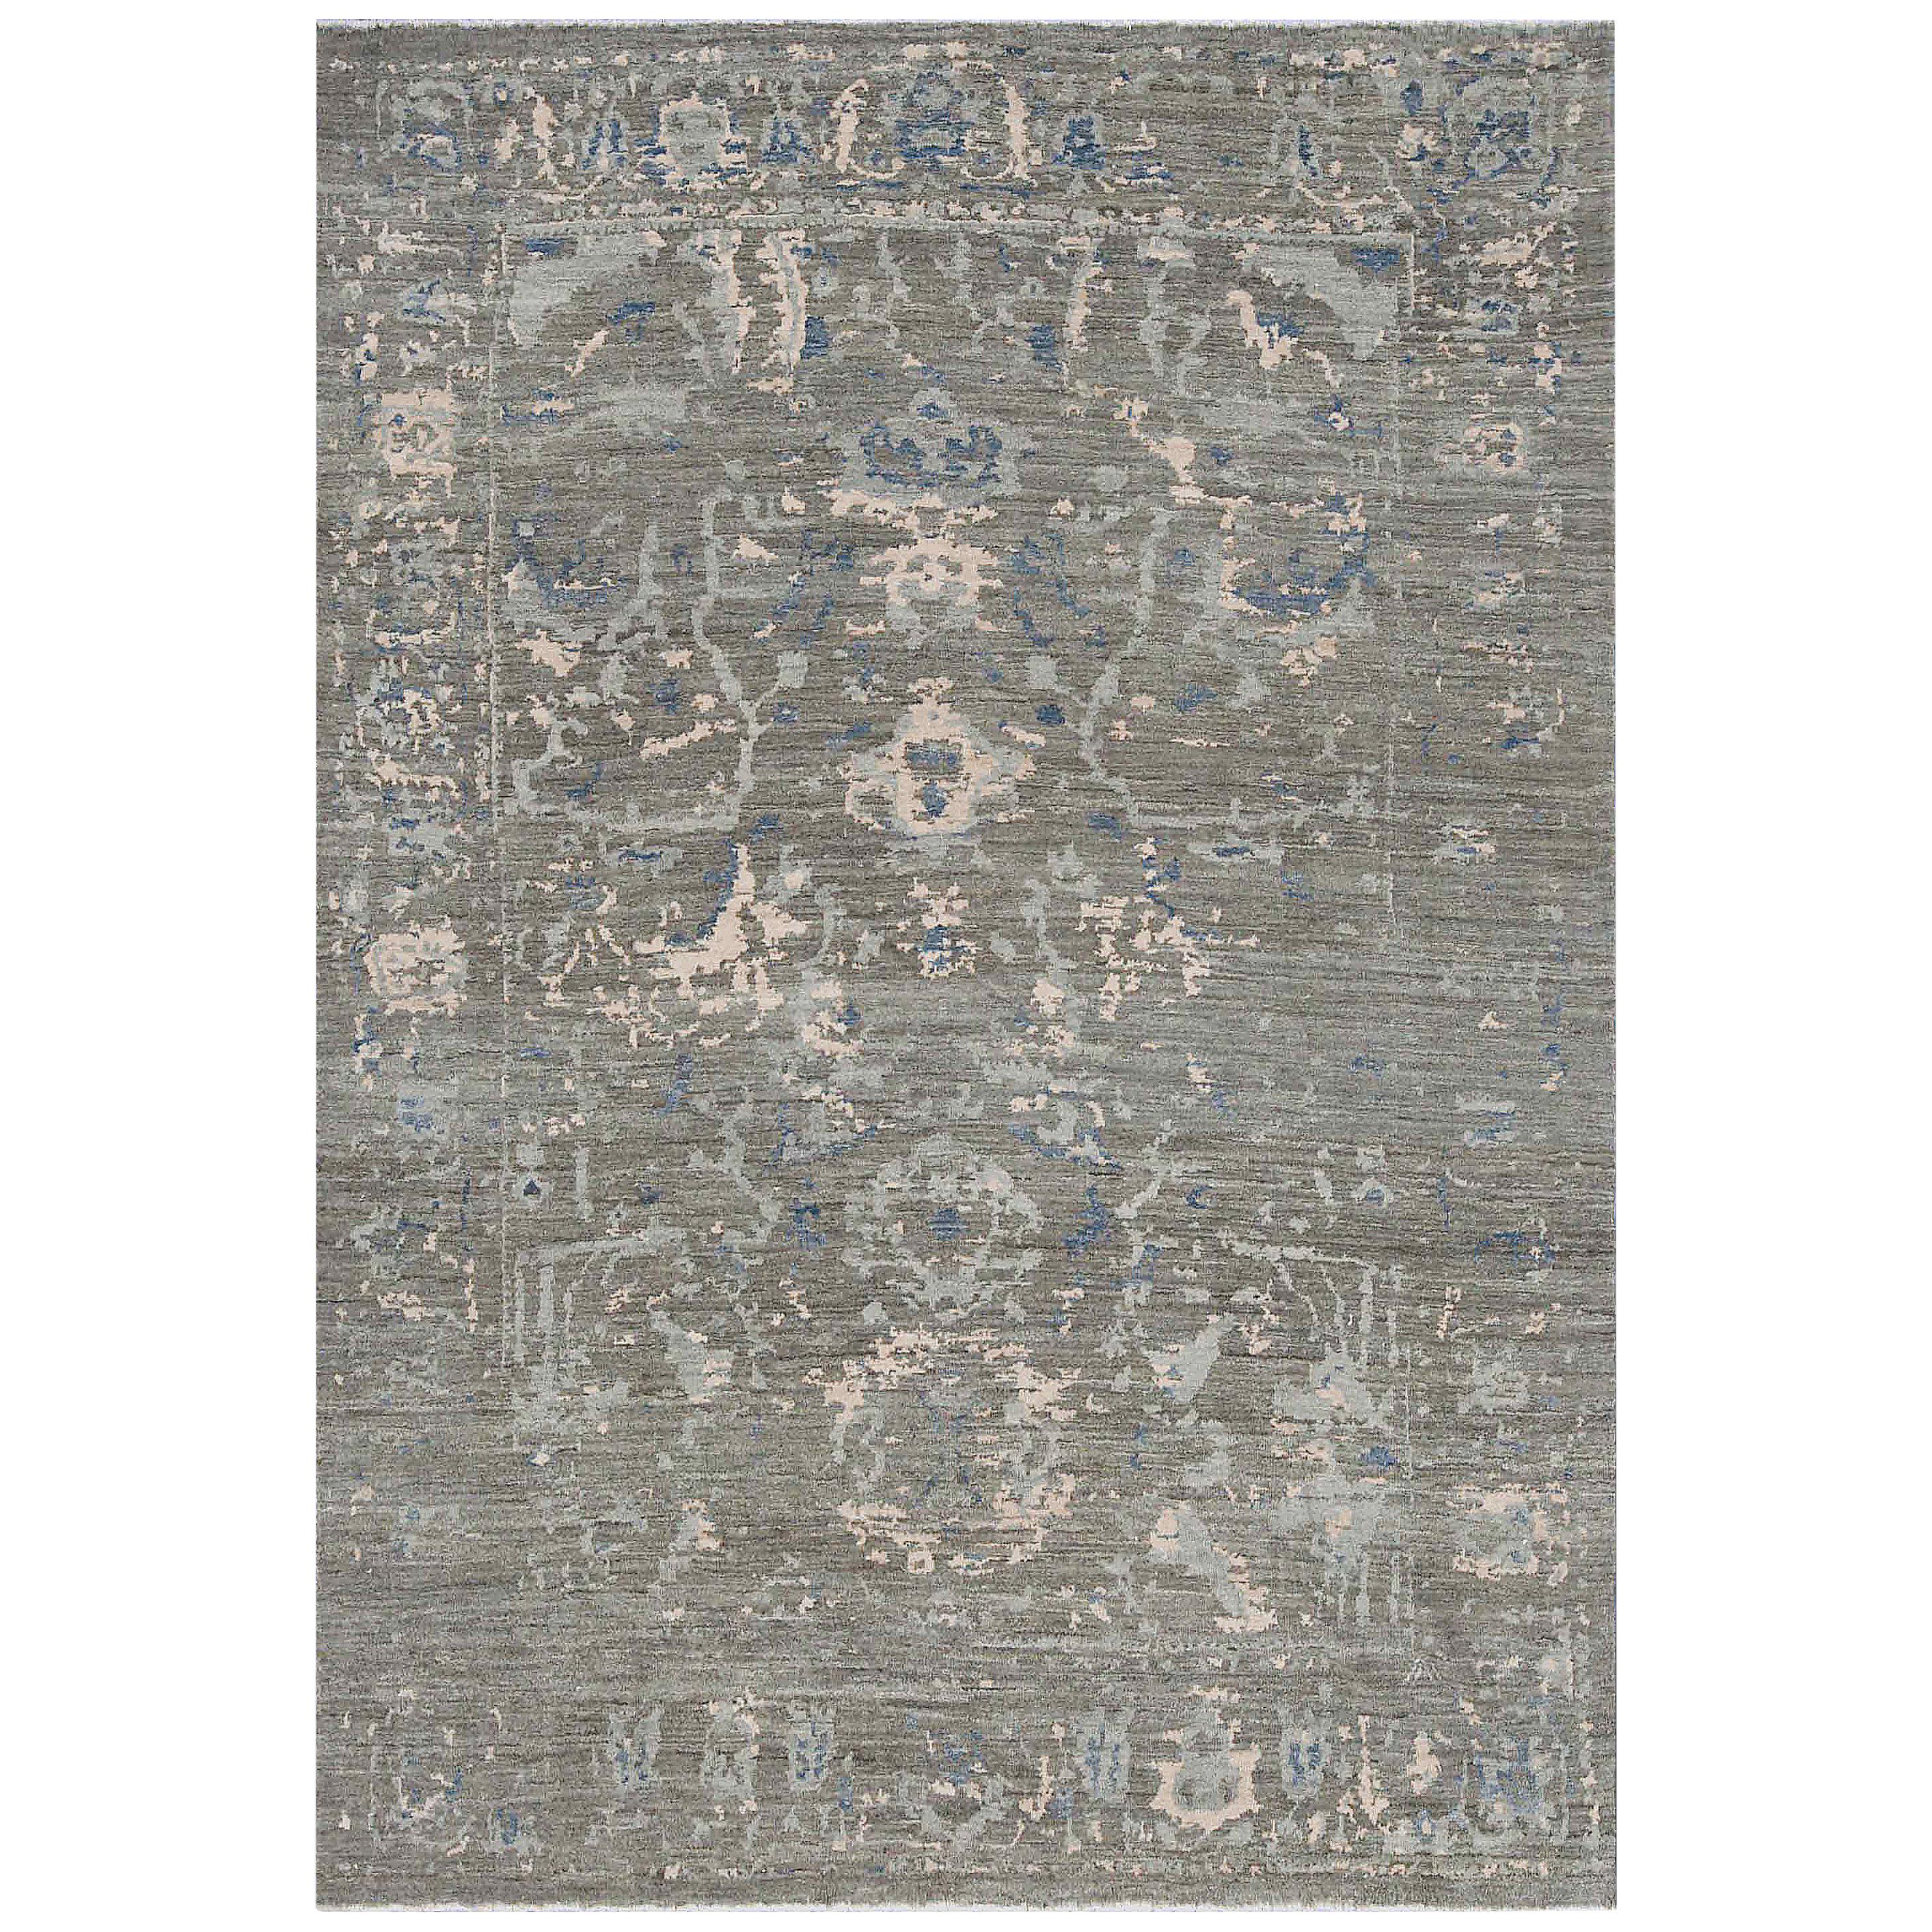 Modern Oushak Rug with Floral Motifs in Navy and Pink on Gray Field